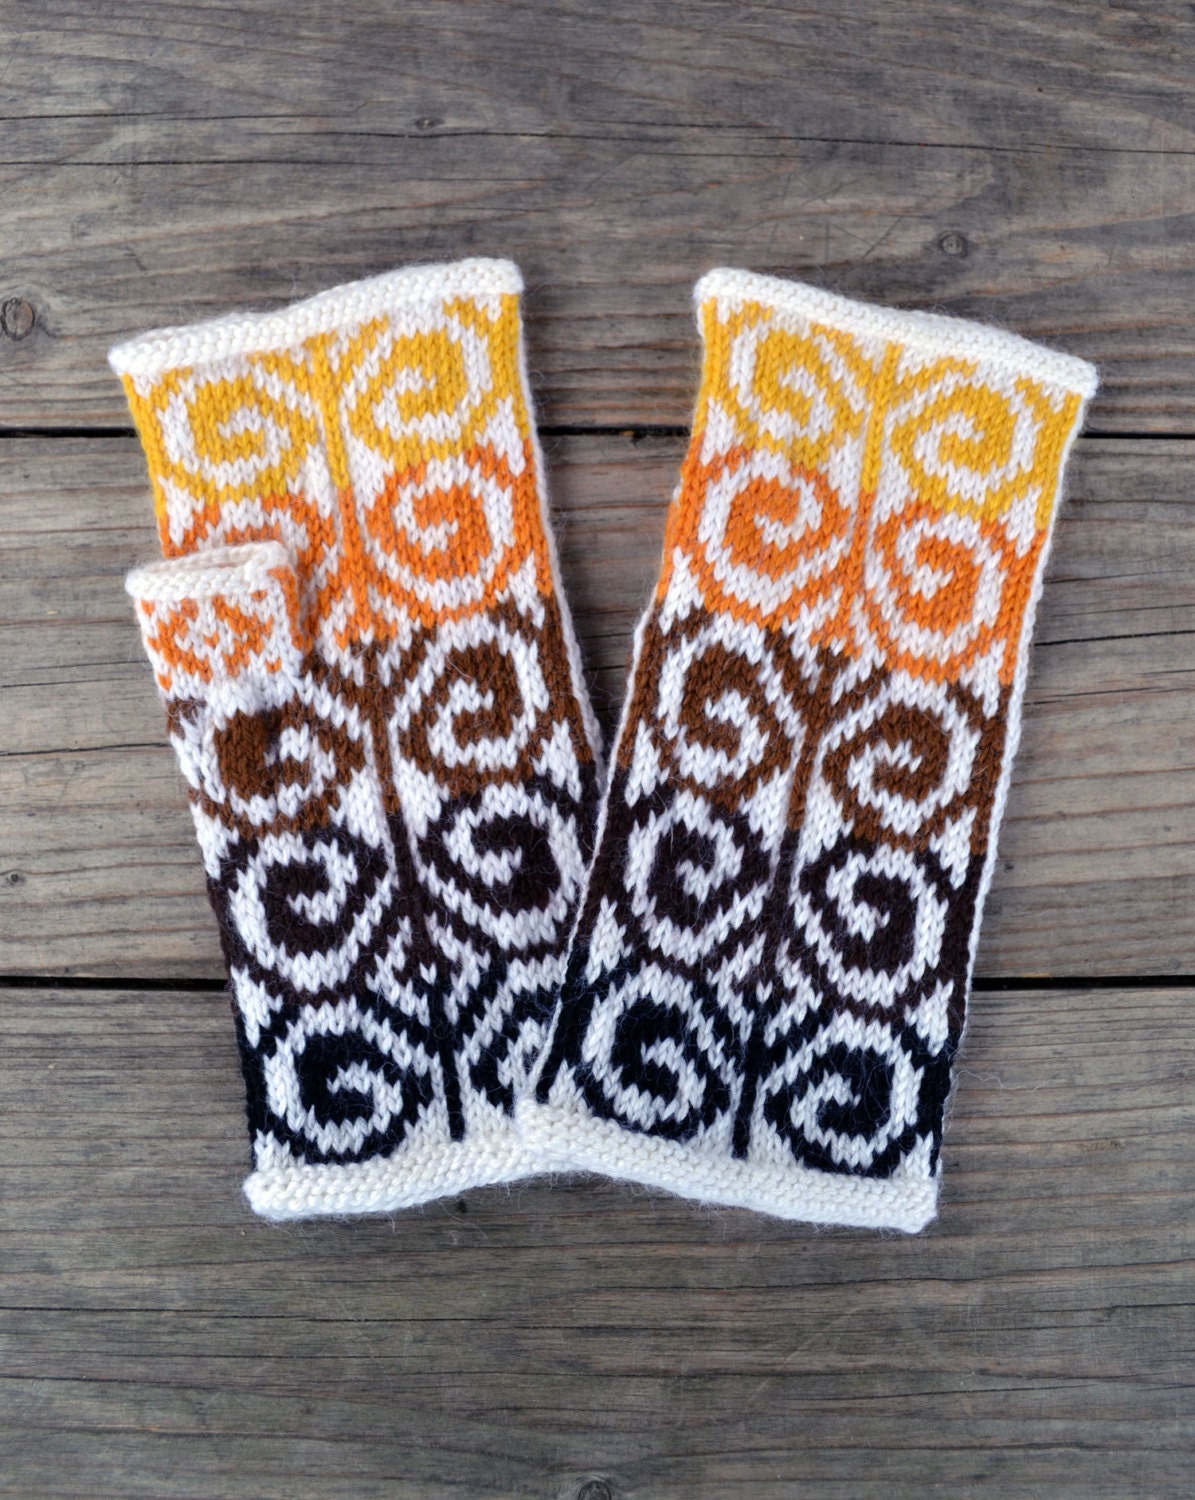 Wool Arm Warmers - Hand-knit Fingerless Gloves- Yellow and Brown Fingerless Mittens - Fall Winter Accesories nO 68.